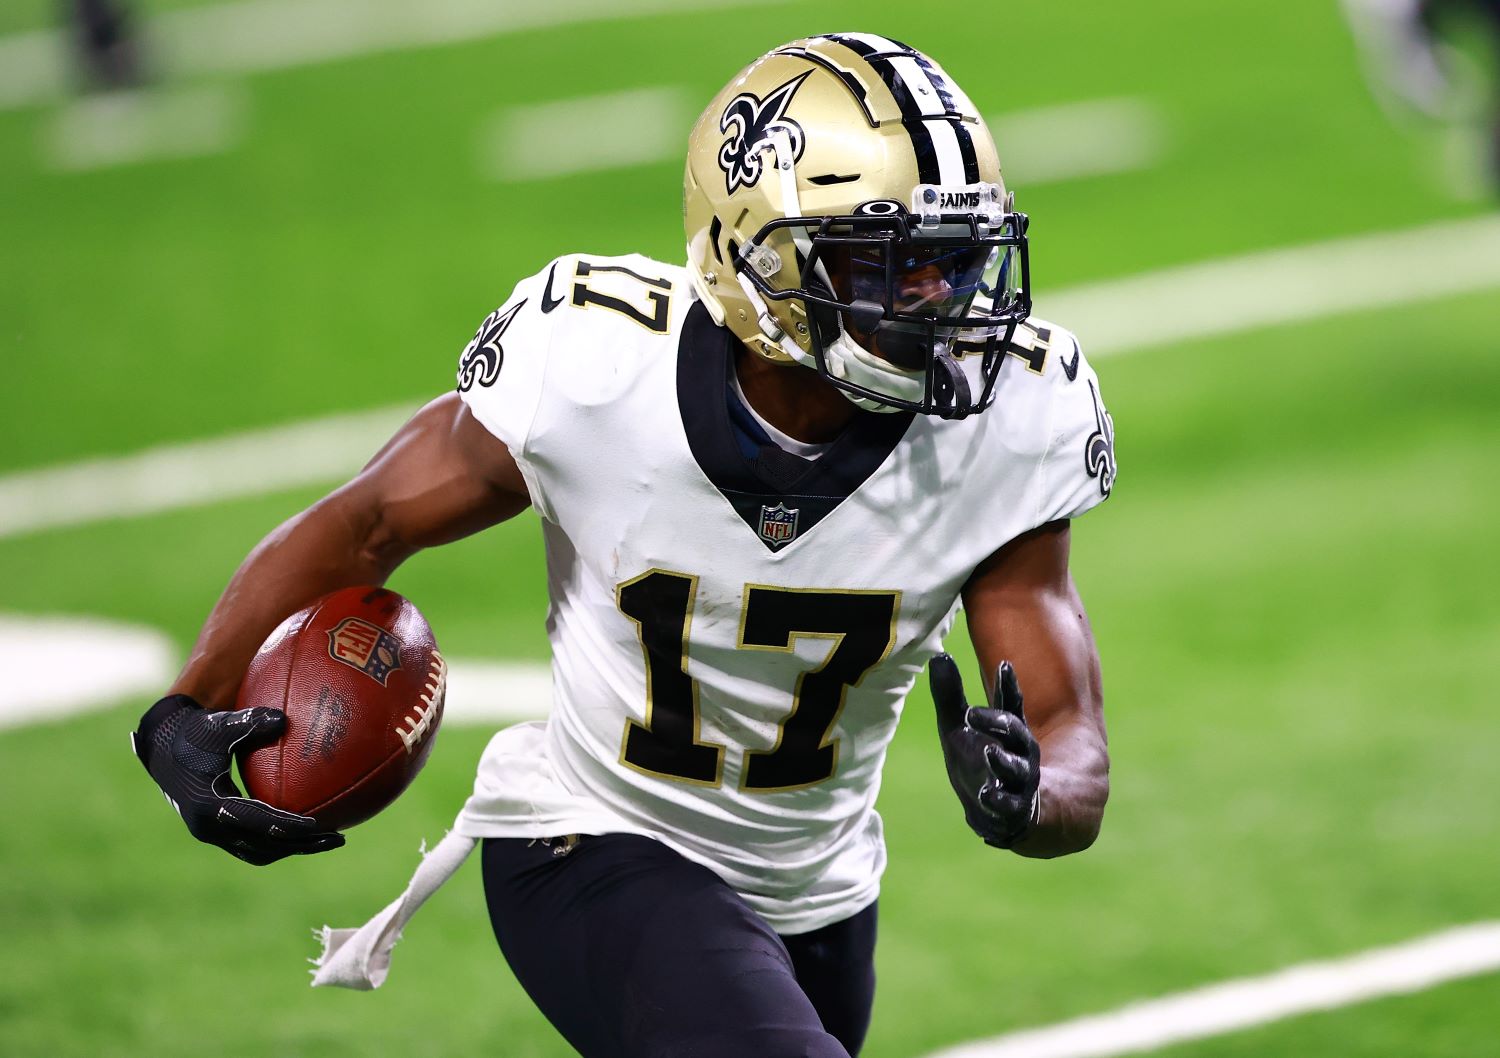 The Saints just suffered a brutal COVID-19 blow with Emmanuel Sanders landing on the reserve/COVID-19 list just two days before New Orleans takes on the Carolina Panthers.